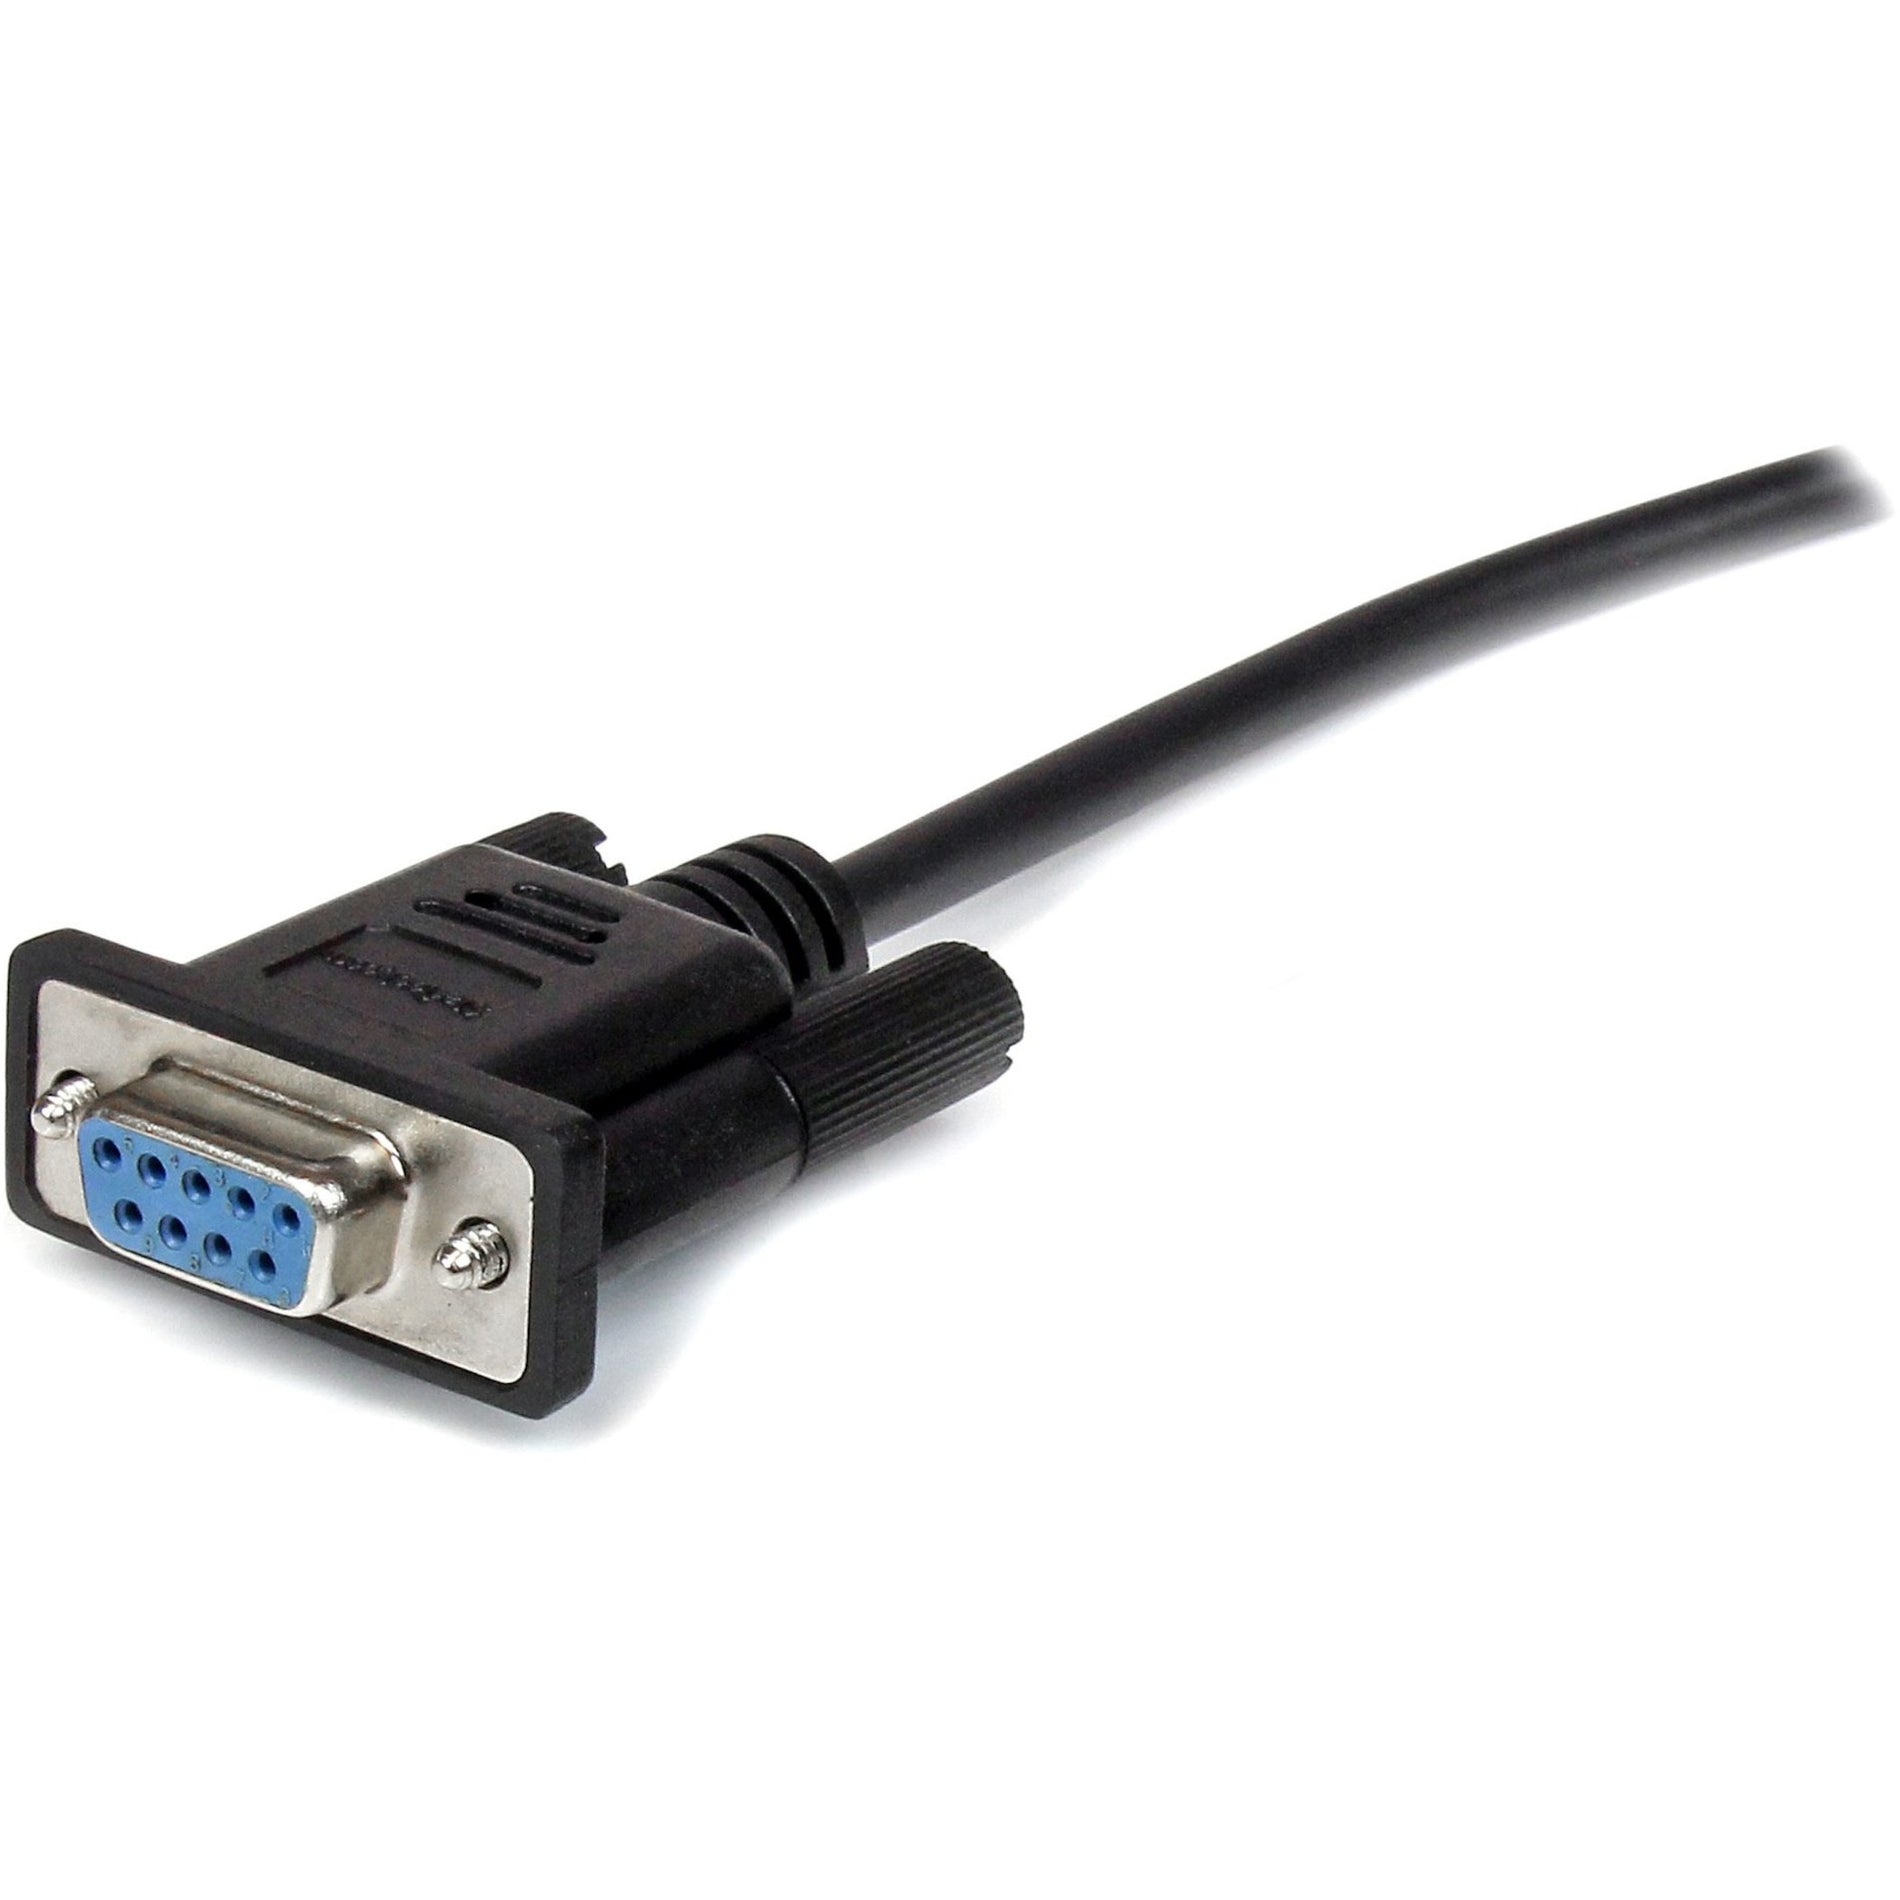 StarTech.com MXT1003MBK 3m Black Straight Through DB9 RS232 Serial Cable - M/F, Molded, EMI Protection, Strain Relief, Lifetime Warranty